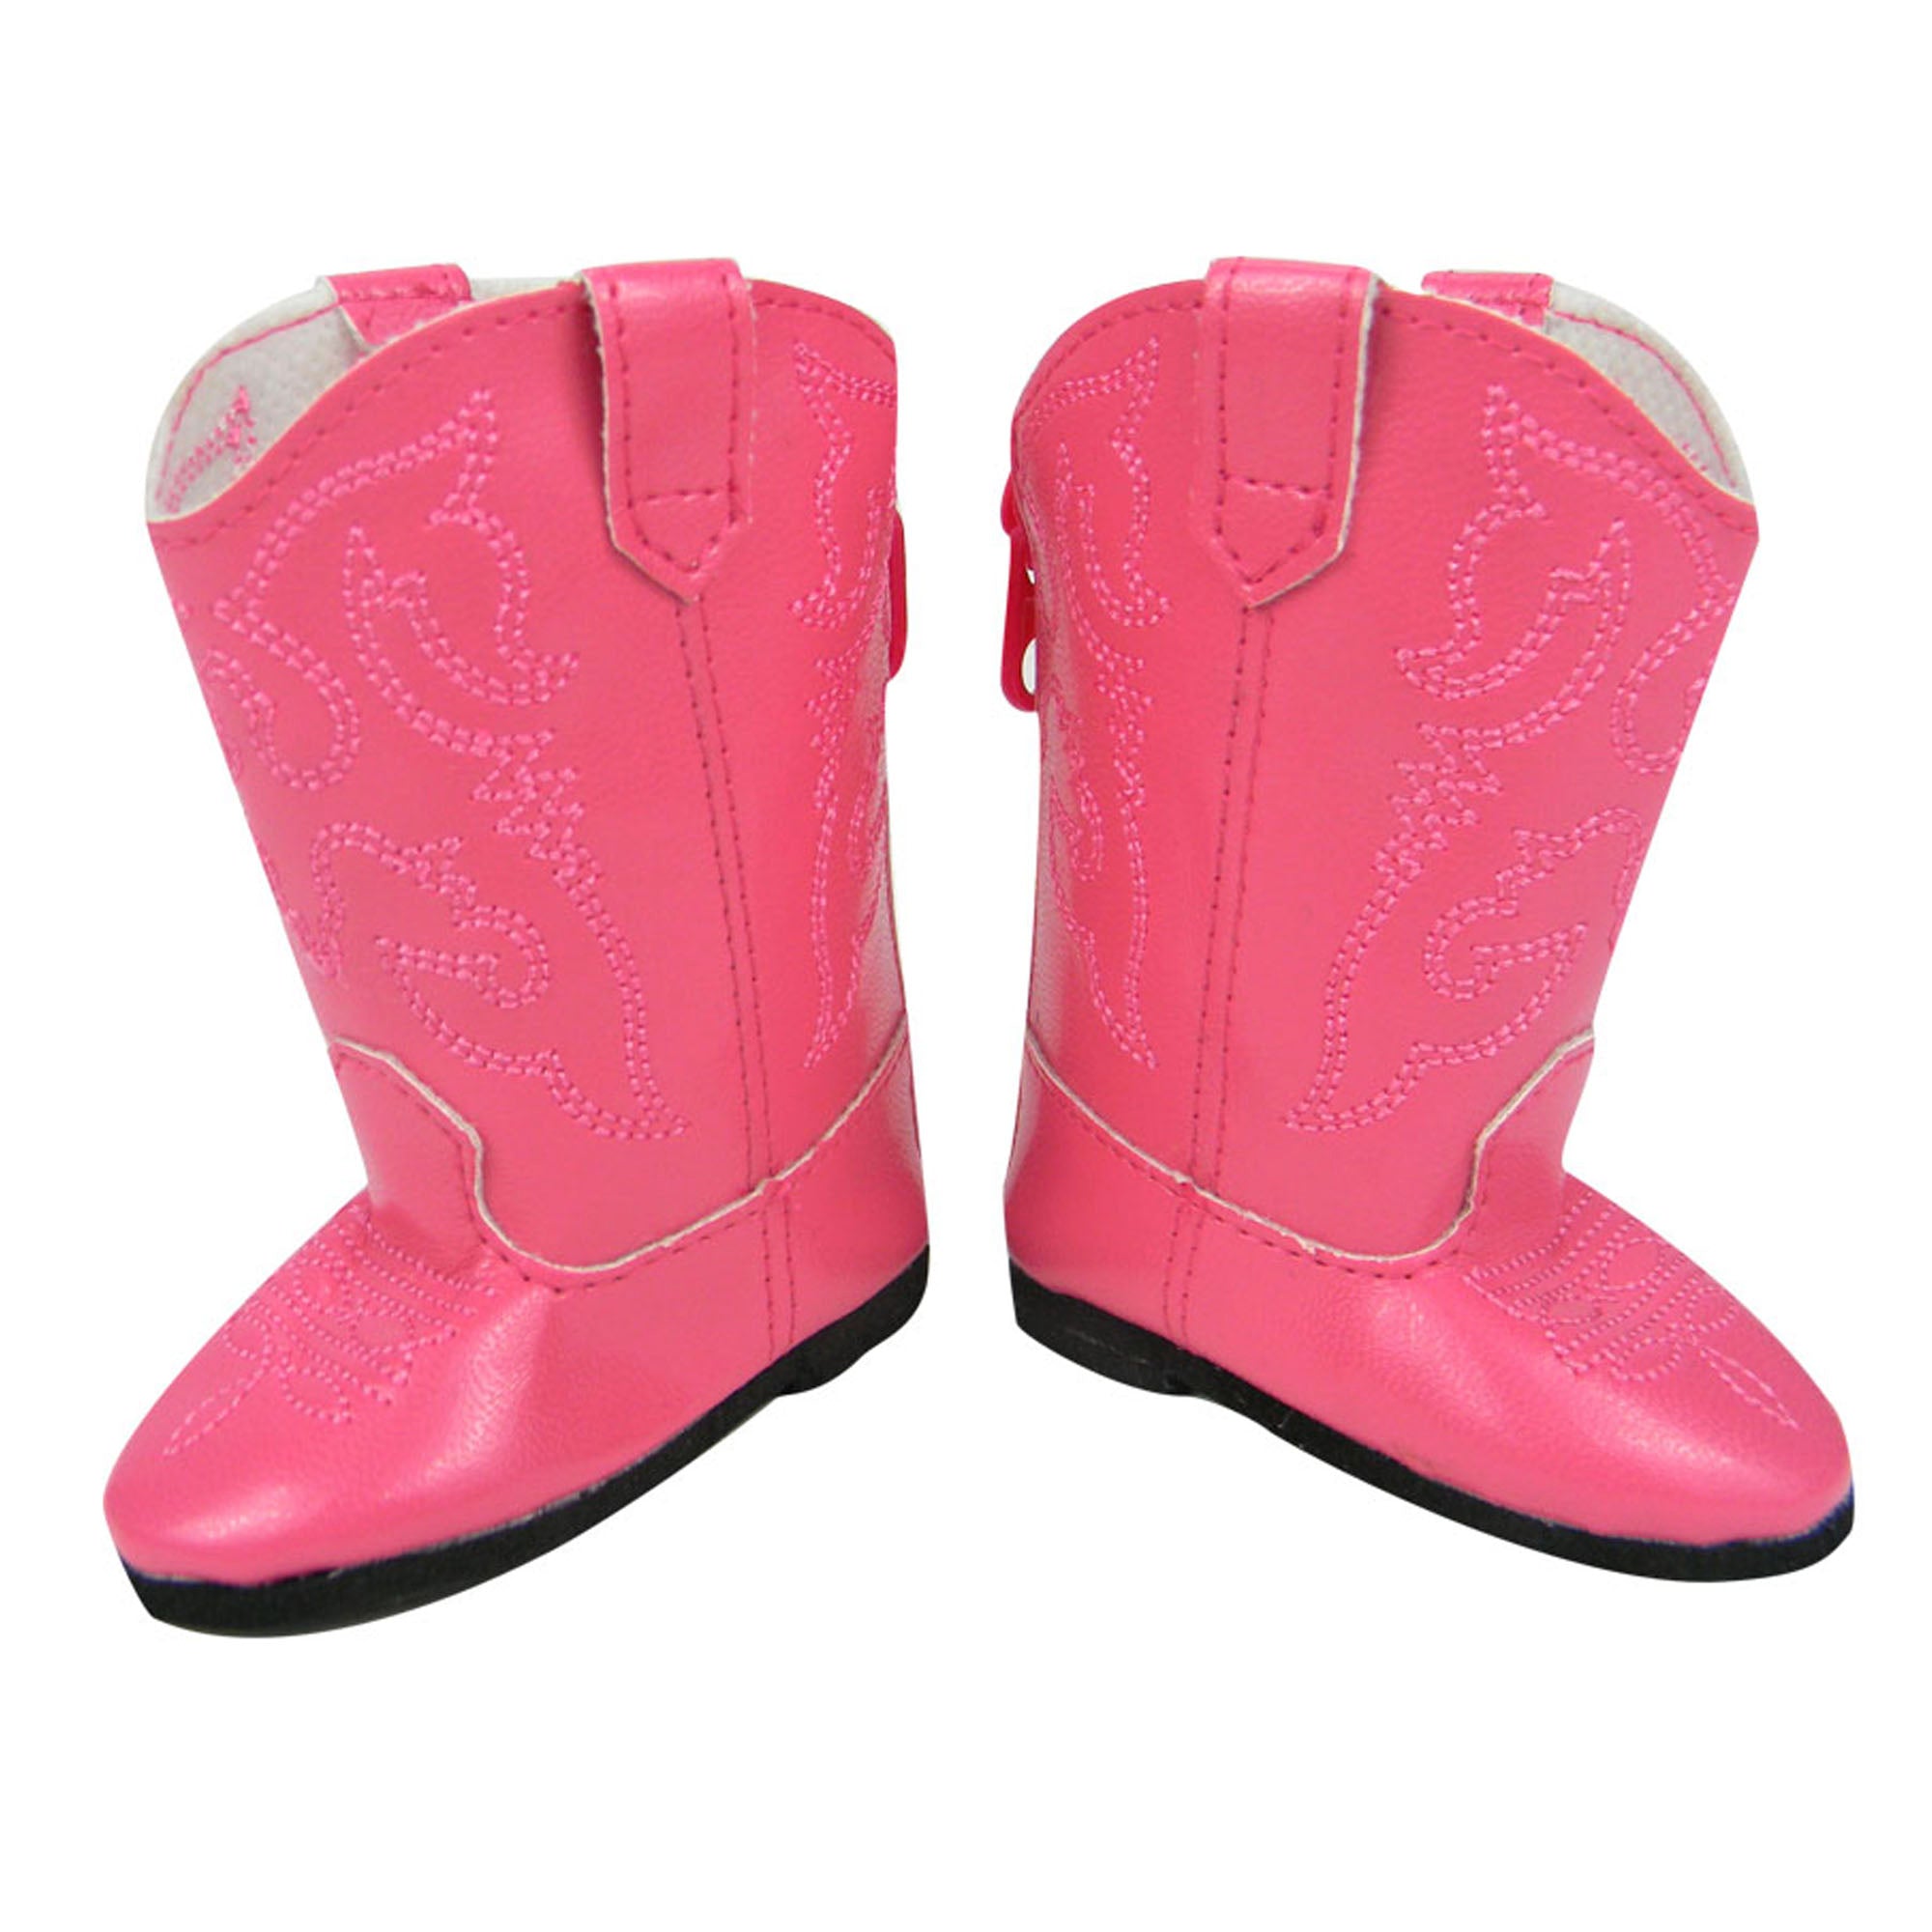 Sophia’s Super-Cute Western Faux Leather Cowboy Boots with Traditional Embroidered Details and Zip-Up Back for 18” Dolls, Hot Pink